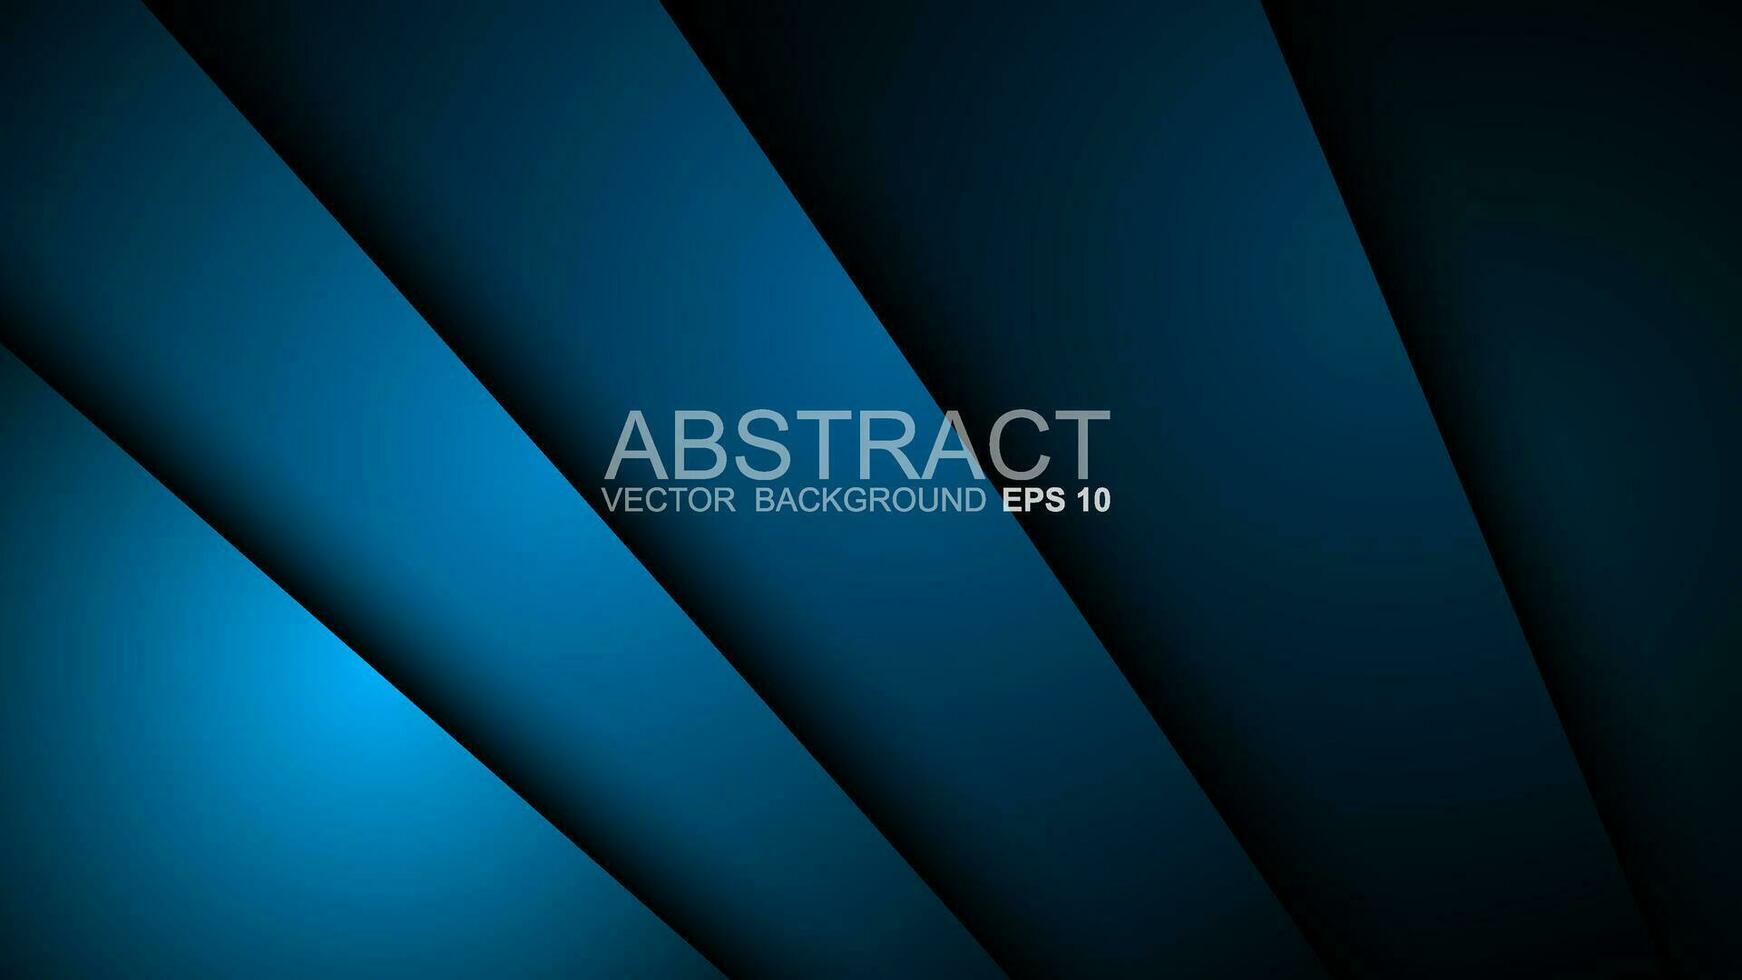 Turquoise green and blue background vector layers overlapping on dark space for background design